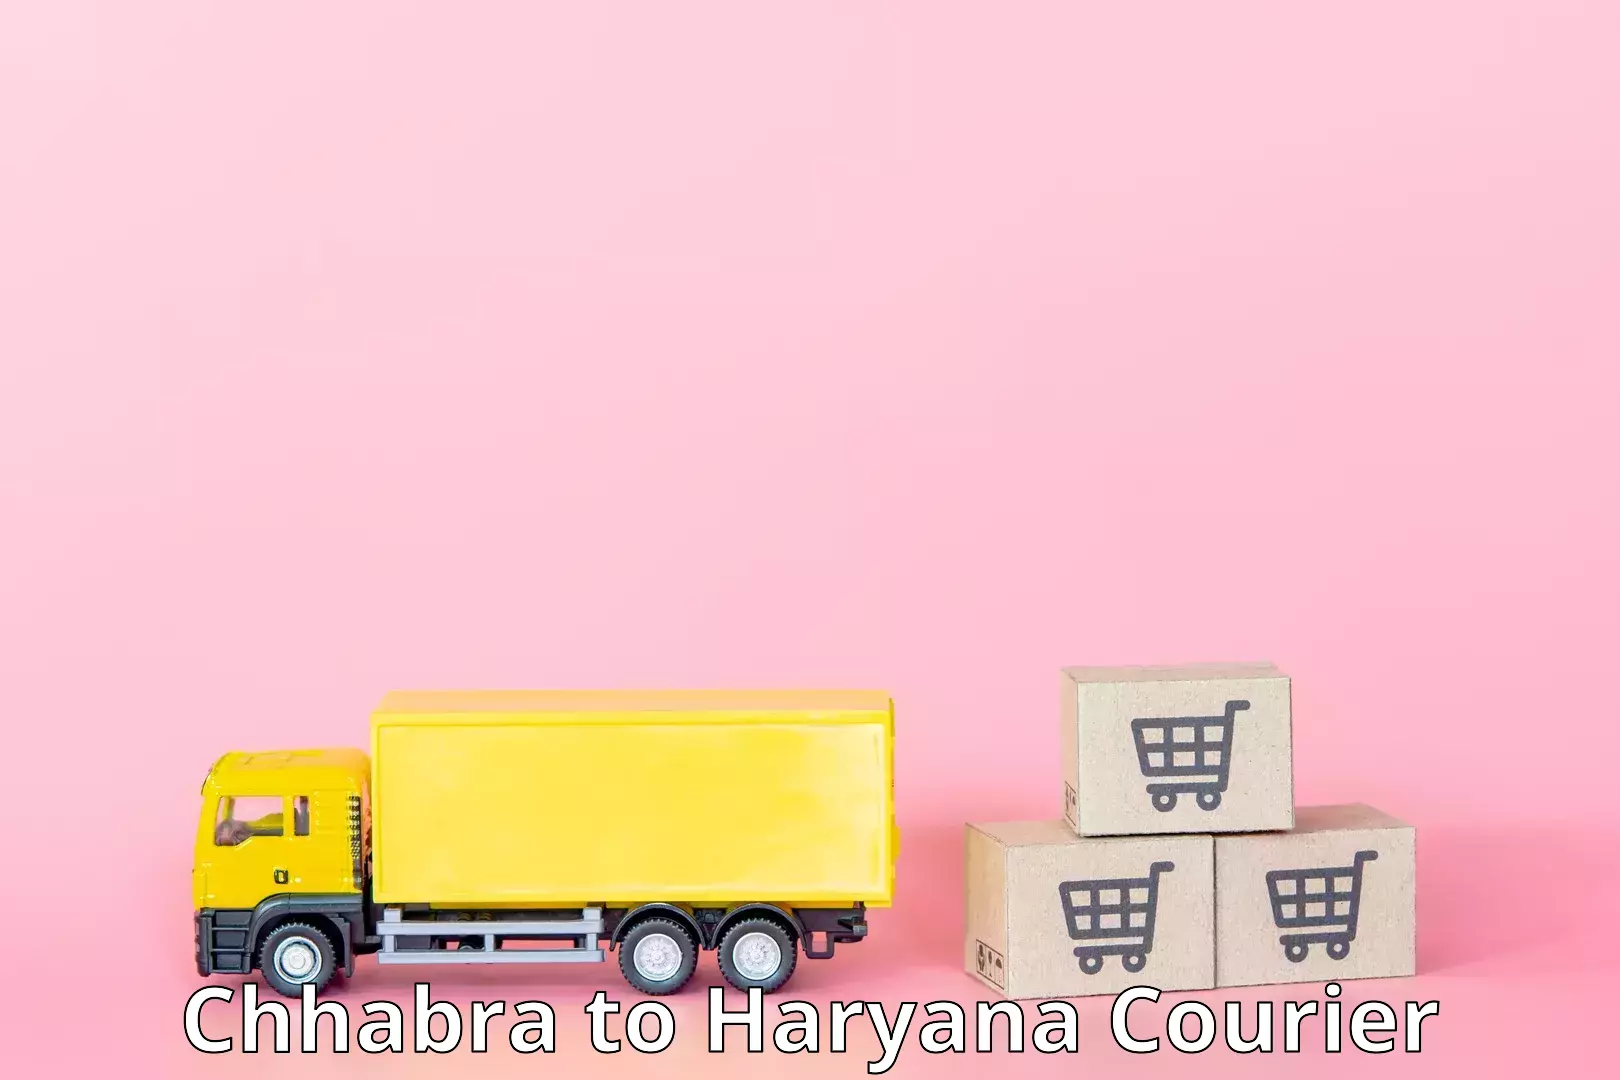 Global parcel delivery Chhabra to NCR Haryana